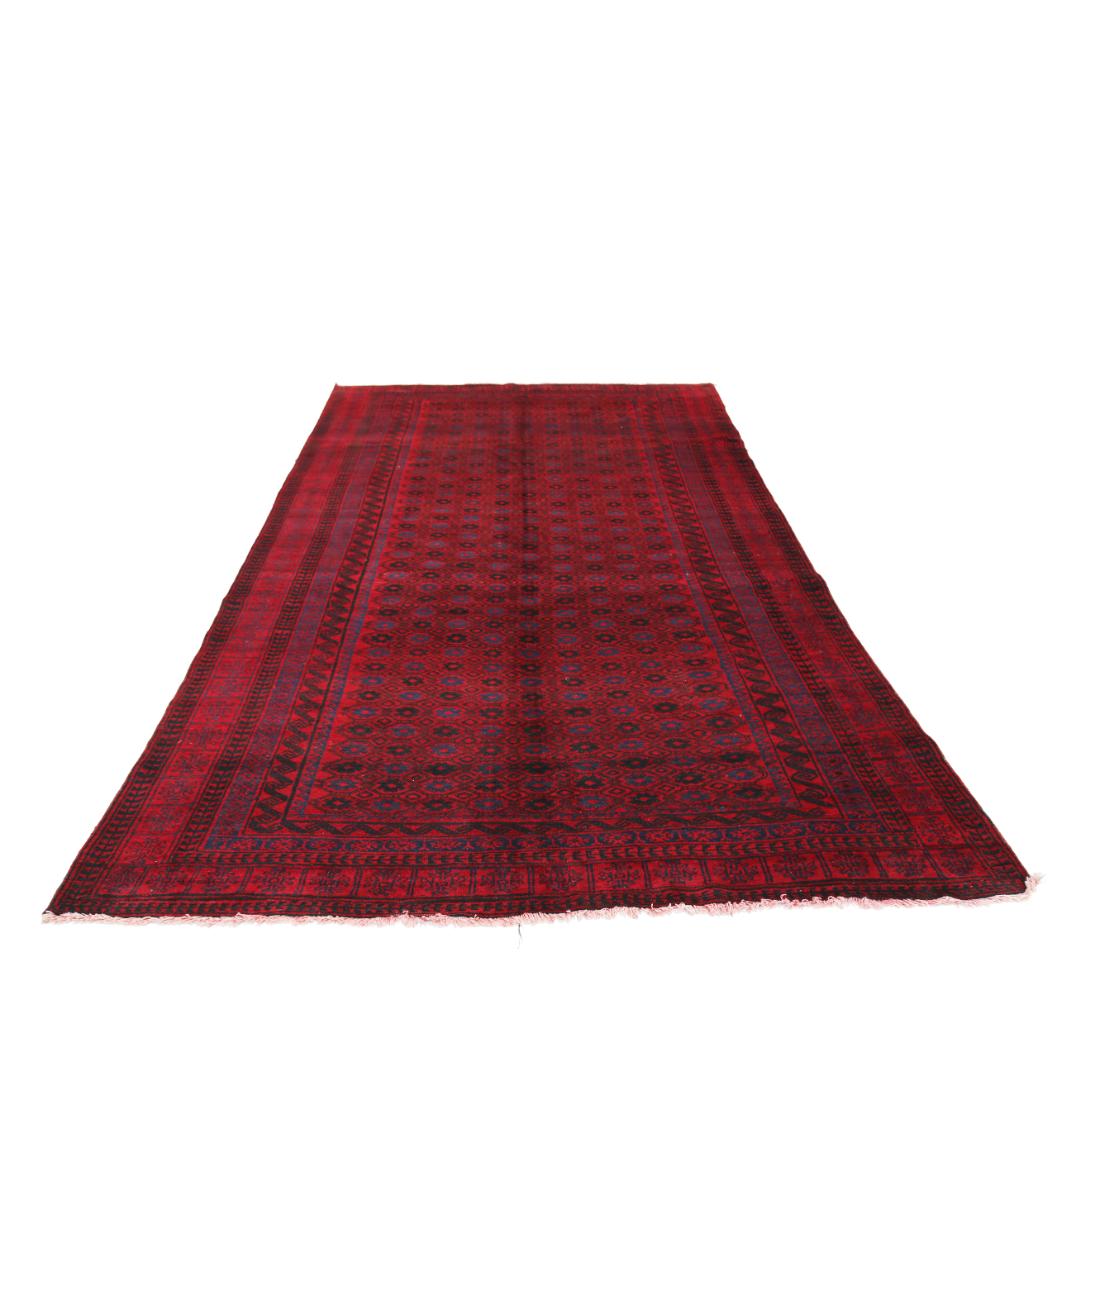 Hand Knotted Afghan Khal Muhammadi Wool Rug - 6'2'' x 11'0'' 6' 2" X 11' 0" (188 X 335) / Red / Blue